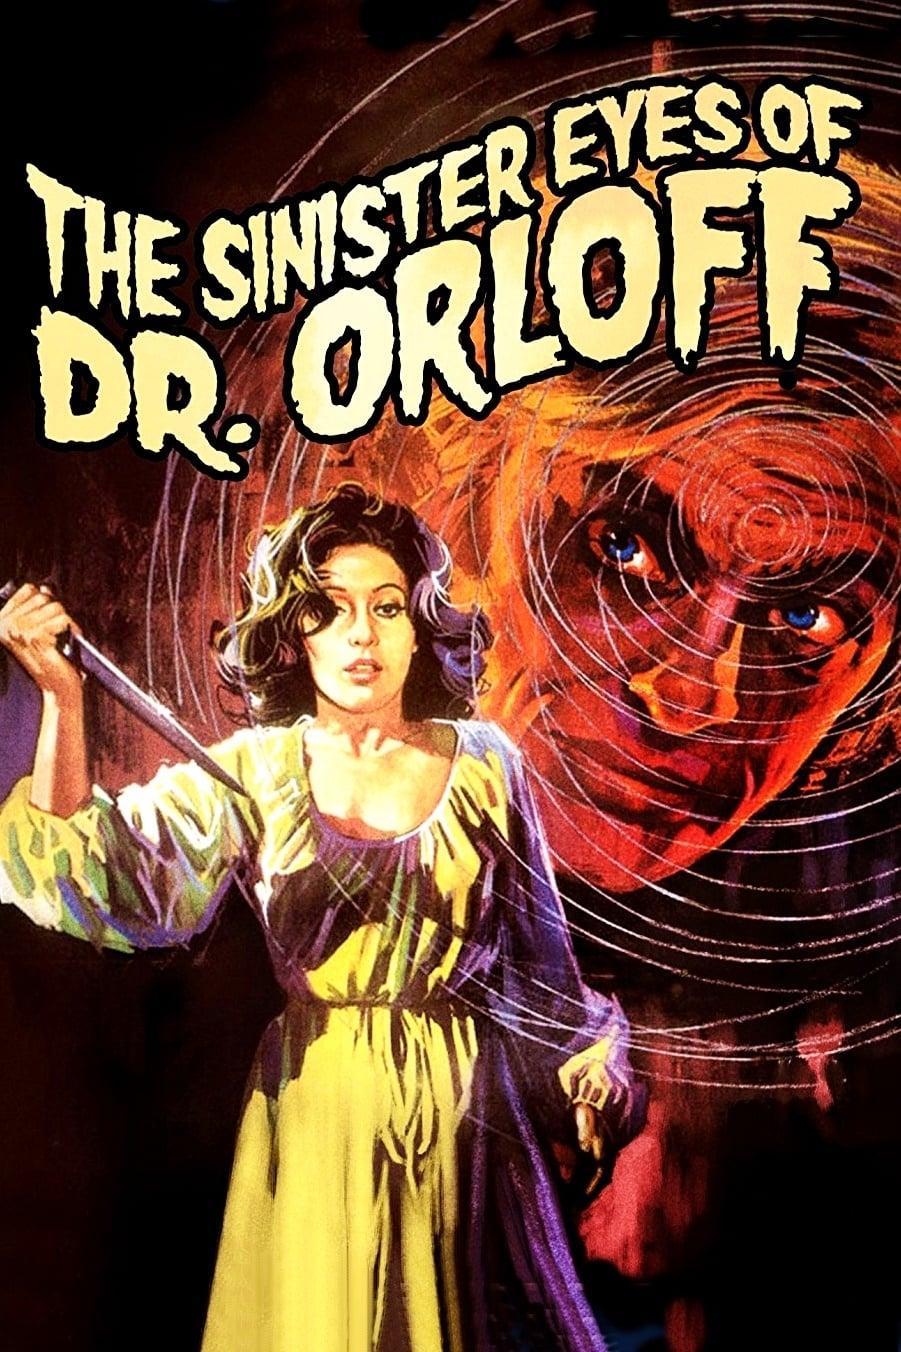 The Sinister Eyes of Dr. Orloff poster